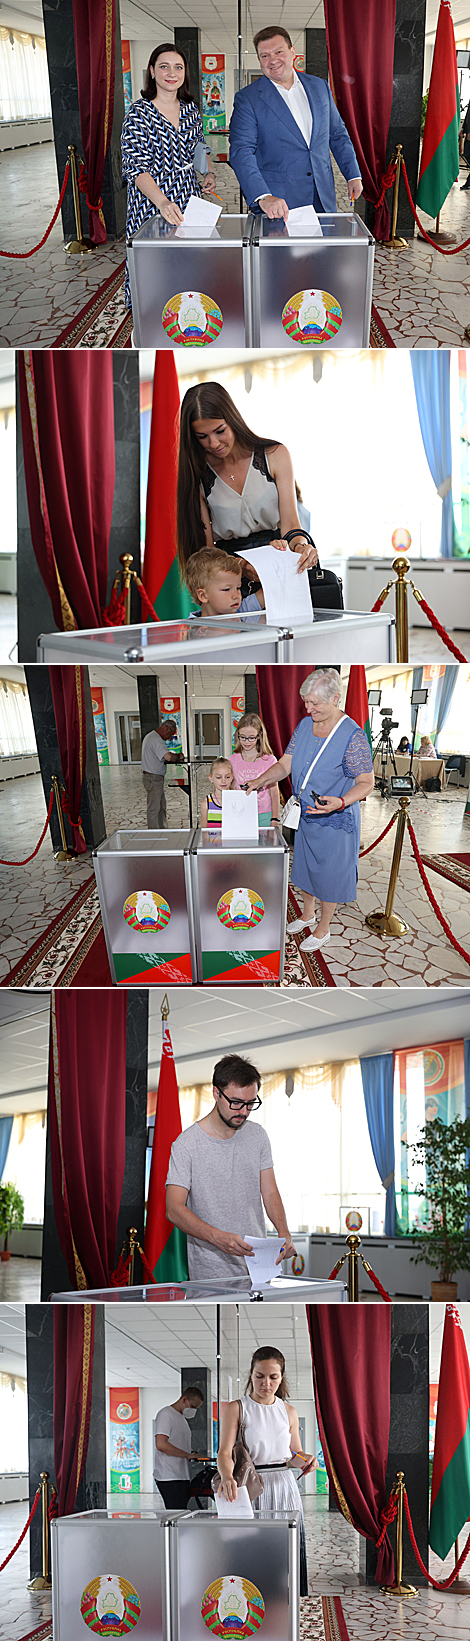 Voting at the polling station No.506 in Minsk